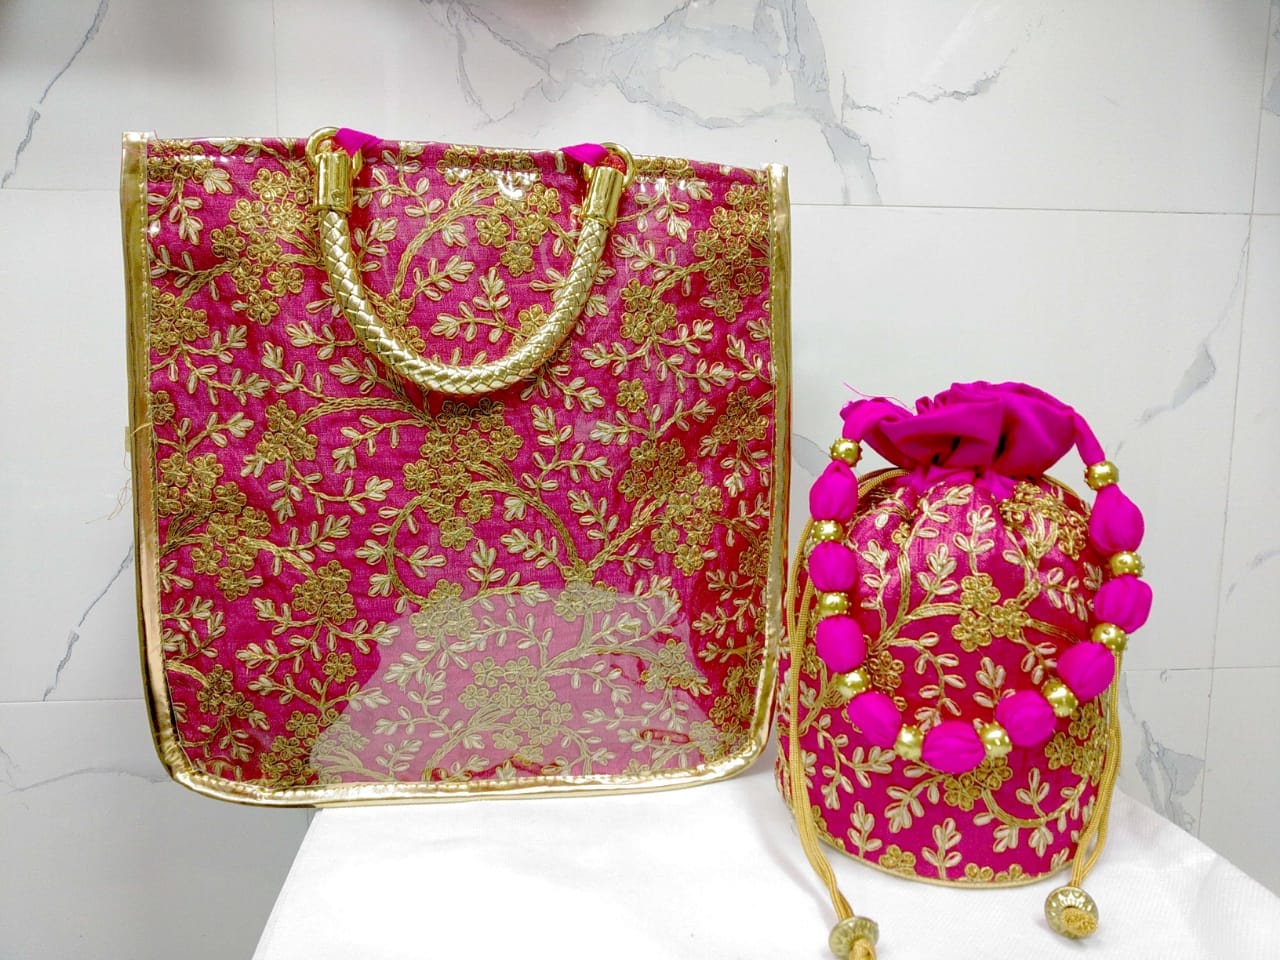 Lamansh LAMANSH Set of Embroidered Poly Hang bag & Batwa Potli / Best combo for Gifting 🎁 / Special giveaways for bridesmaids,wedding function,religious & pooja events